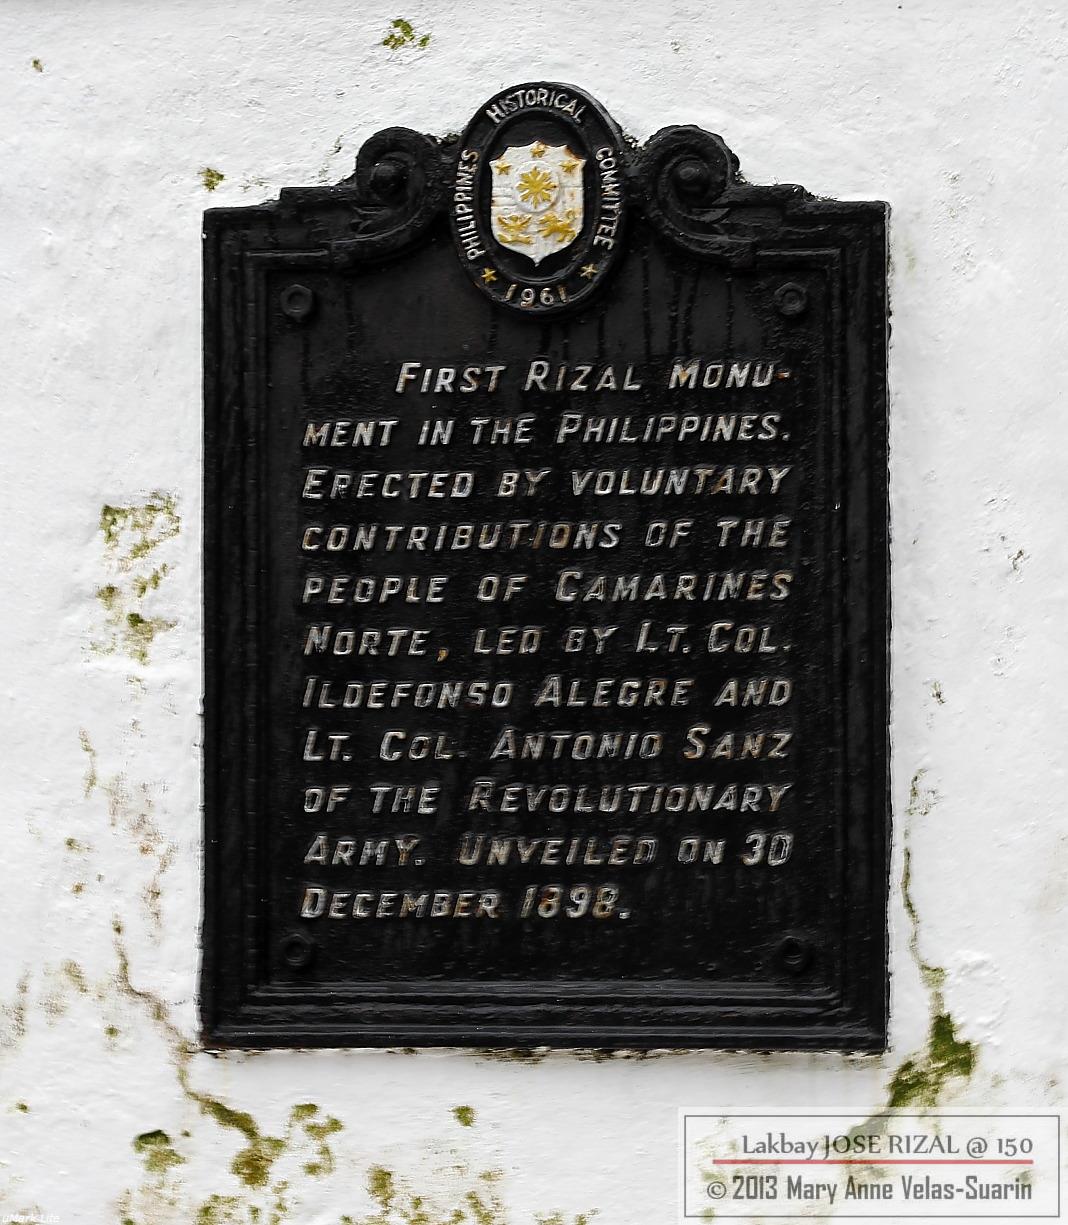 The historical marker of the Rizal Monument in Daet, Camarines Norte. [Photo by Mary Anne Velas-Suarin]